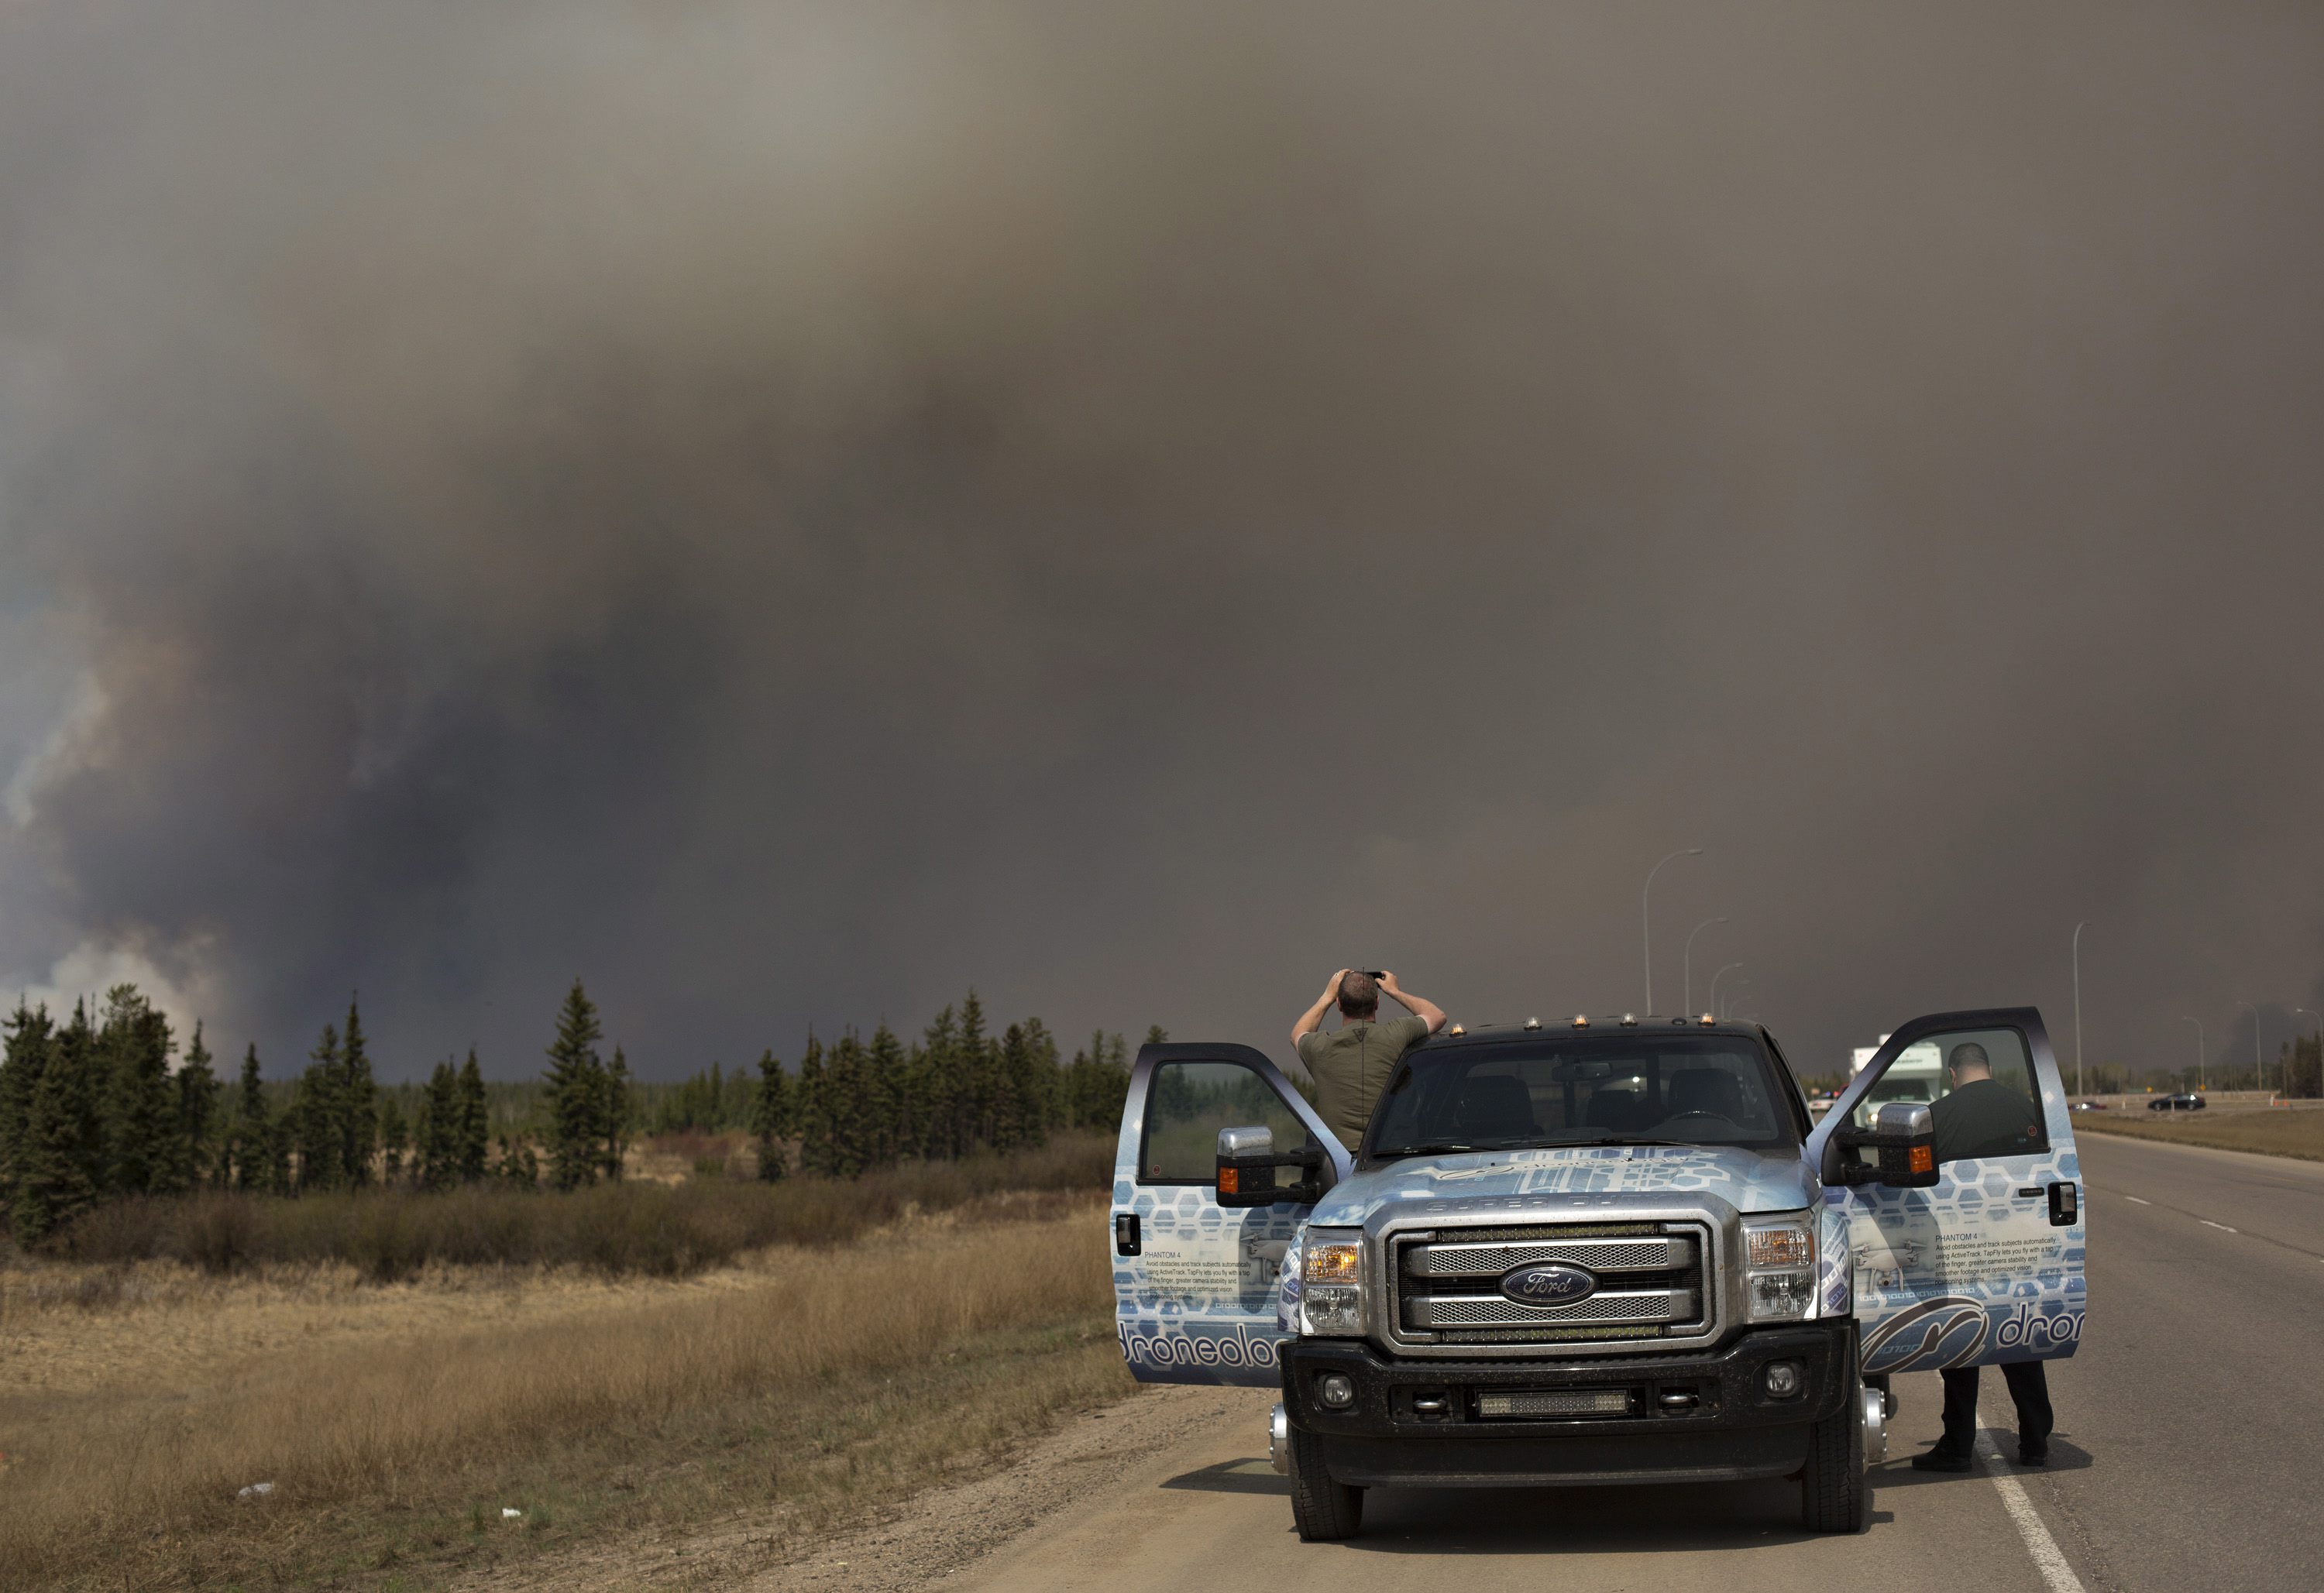 People stop to take photos of a wildfire south of Fort McMurray, Alberta, Canada on Thursday May 5, 2016. Raging wildfires in the Canadian province of Alberta have moved south, forcing three more communities to evacuate and an emergency operations center to move again. (Jason Franson/The Canadian Press via AP) MANDATORY CREDIT